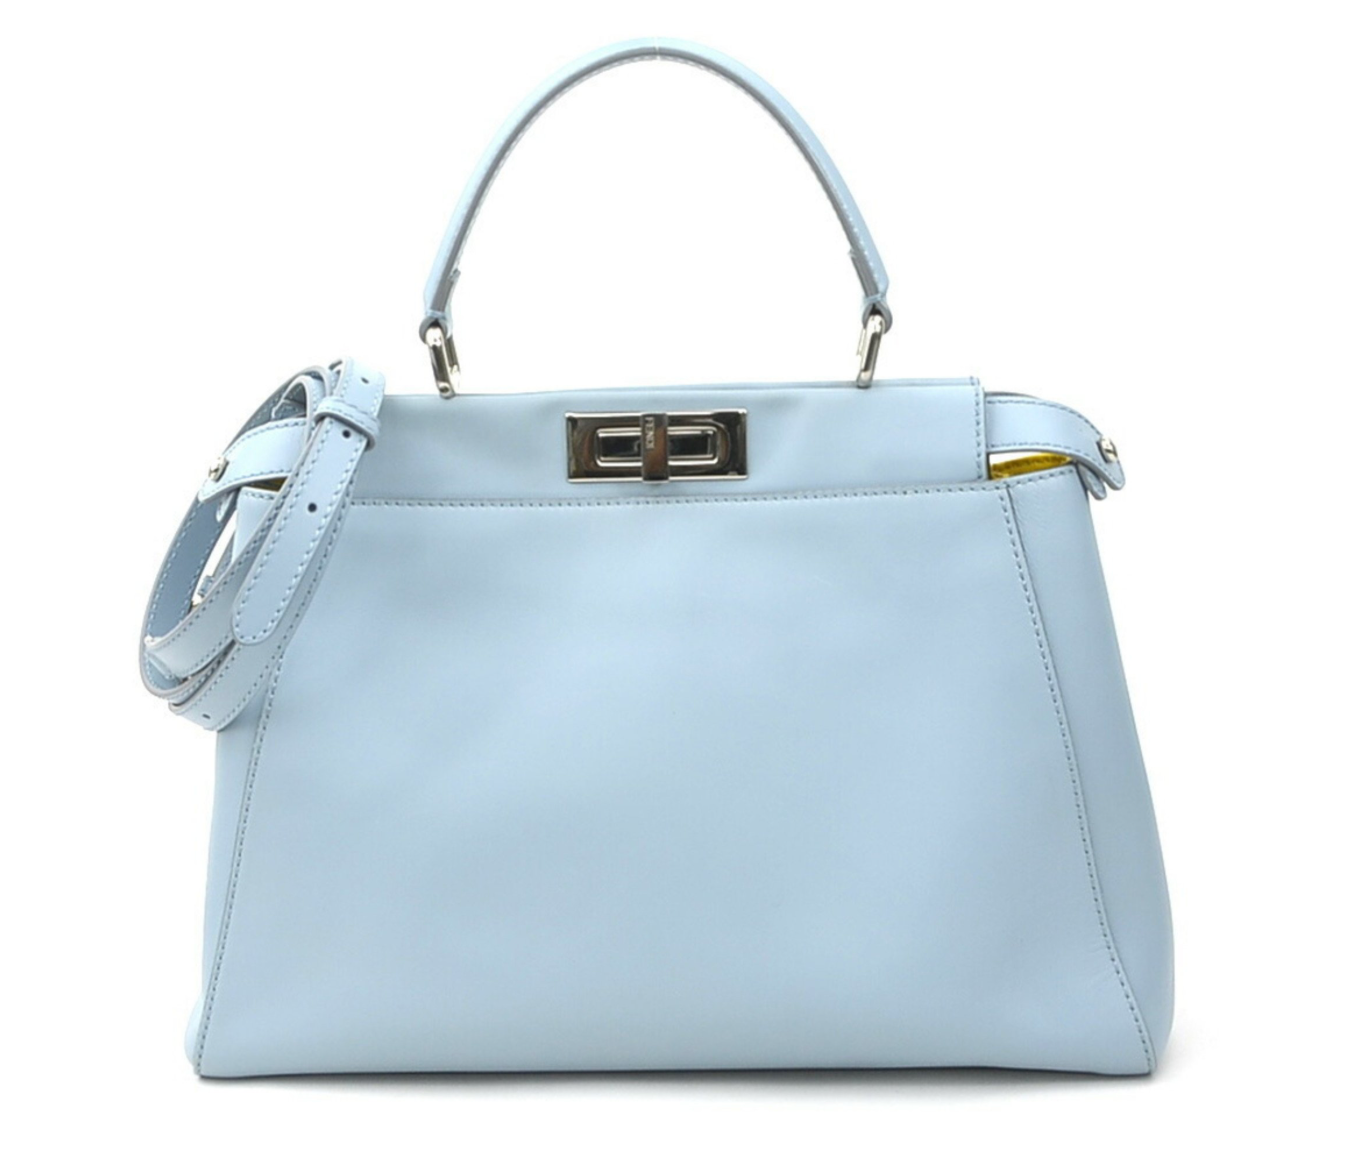 Pre-owned medium Fendi Peekaboo handbag of light blue leather and silver hardware with a long strap